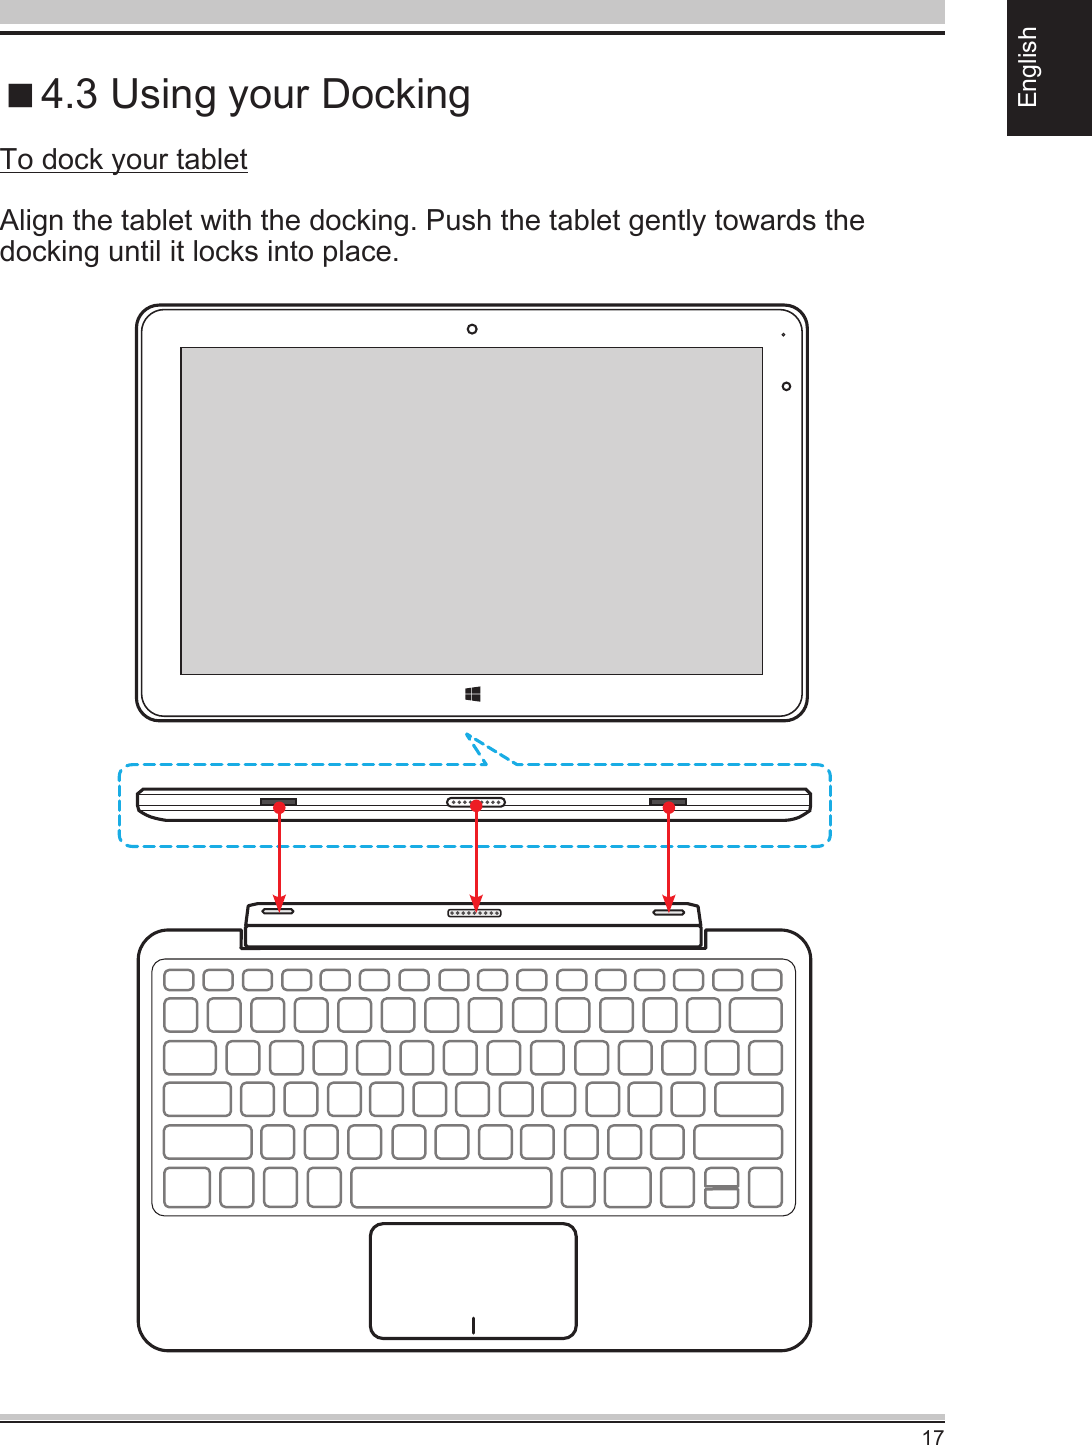 17English4.3 Using your DockingTo dock your tabletAlign the tablet with the docking. Push the tablet gently towards the docking until it locks into place.